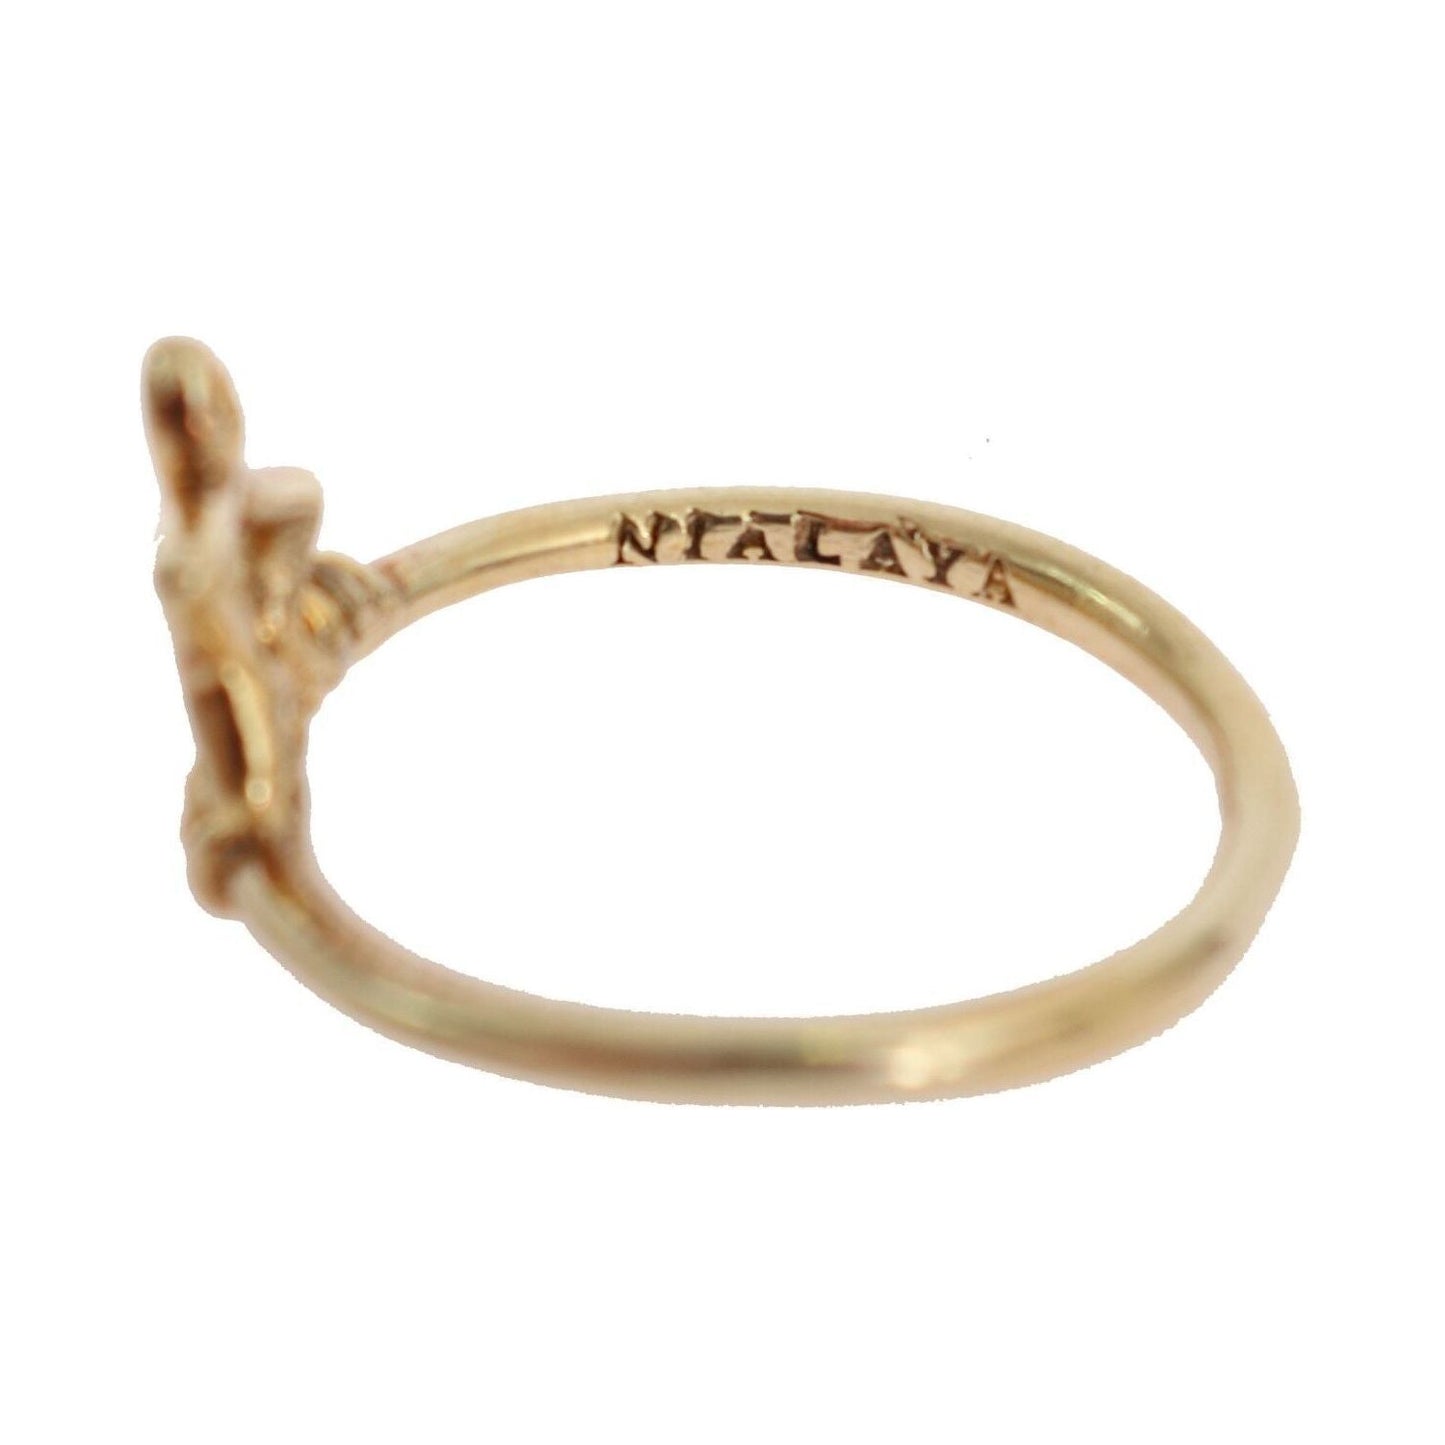 Nialaya Elegant Gold-Plated Sterling Silver Ring Ring gold-925-silver-authentic-star-ring